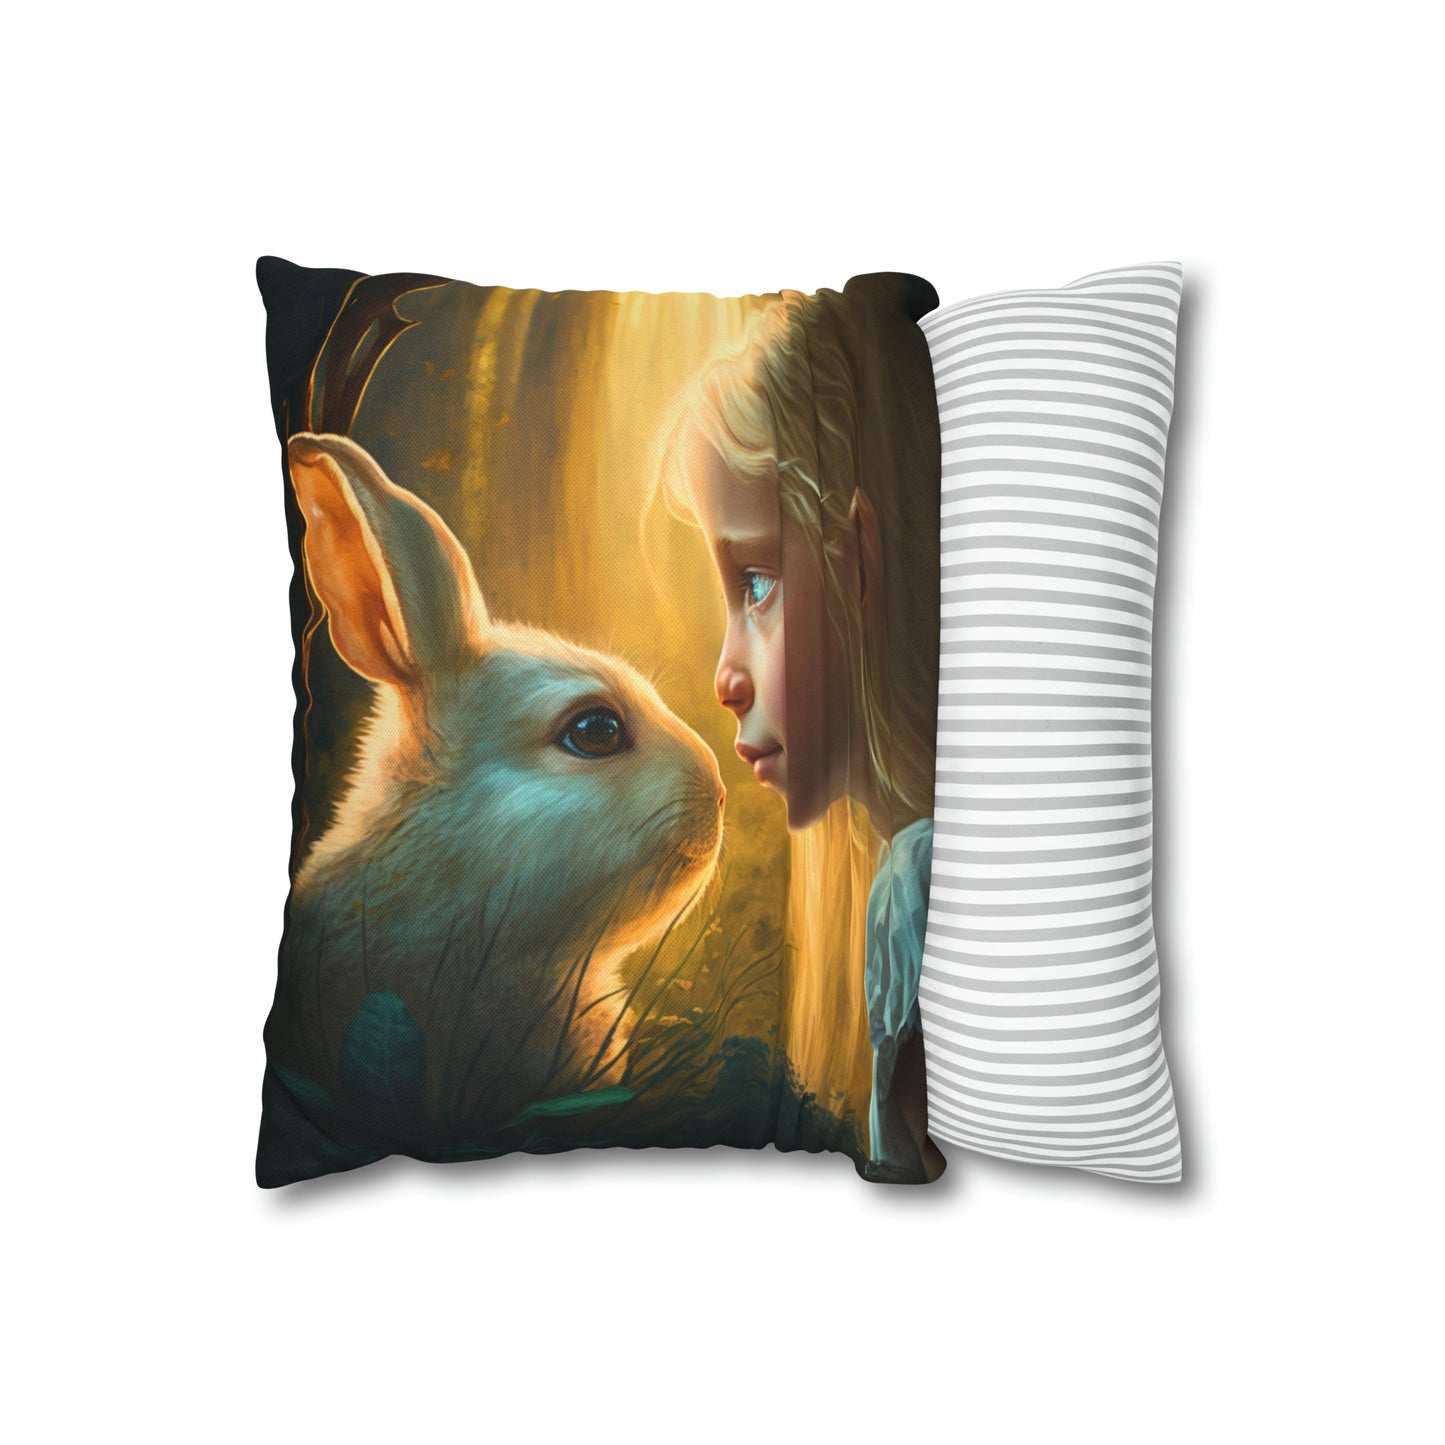 Square Pillow - Lucy and the Enchanted Forest 1